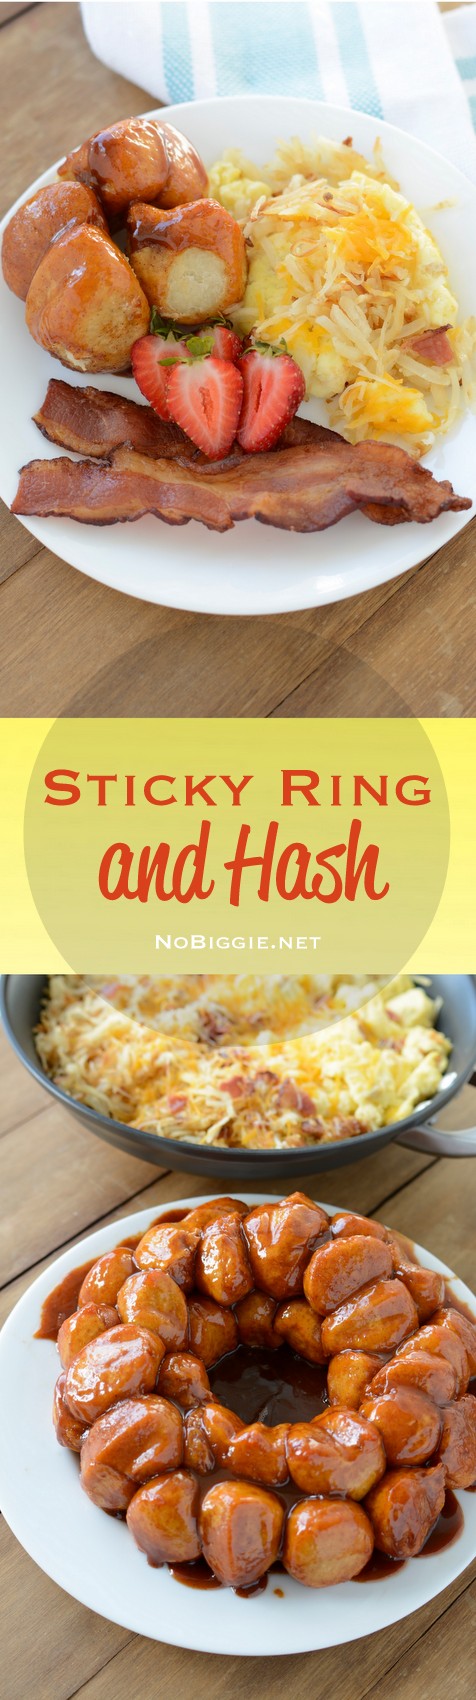 sticky ring and hash our breakfast tradition | NoBiggie.net